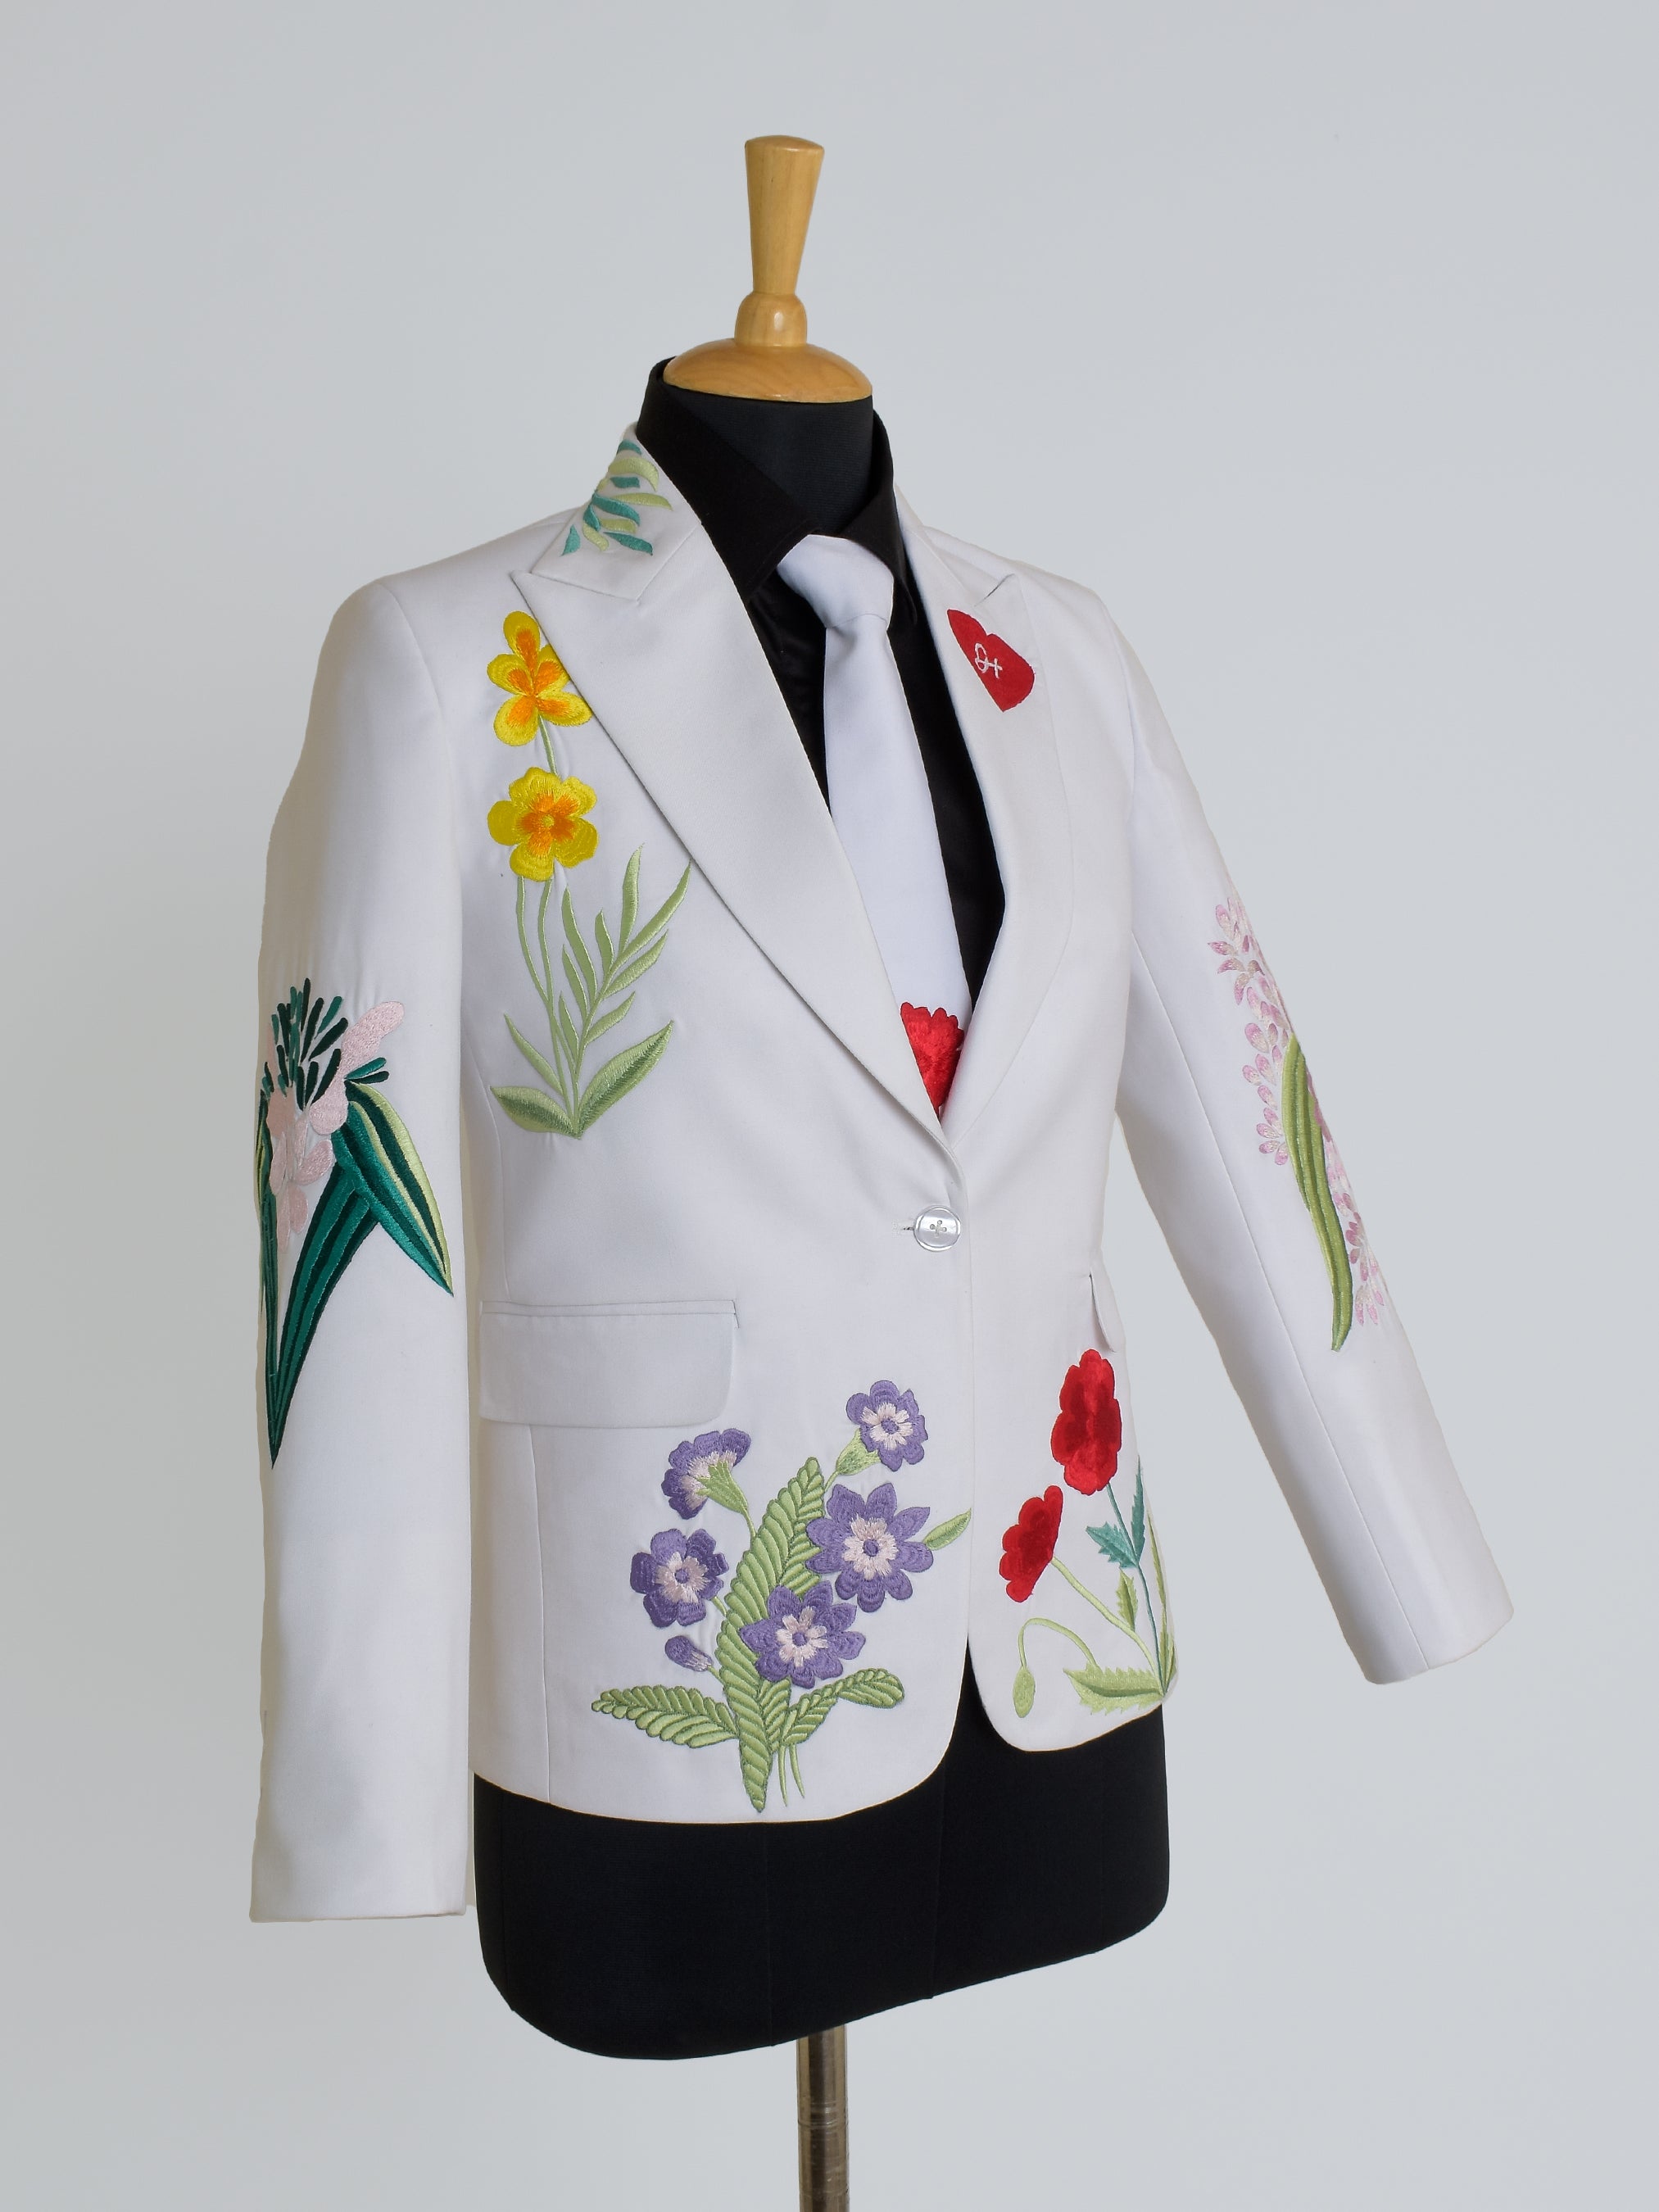 Poppy Blossom Country Western Suit